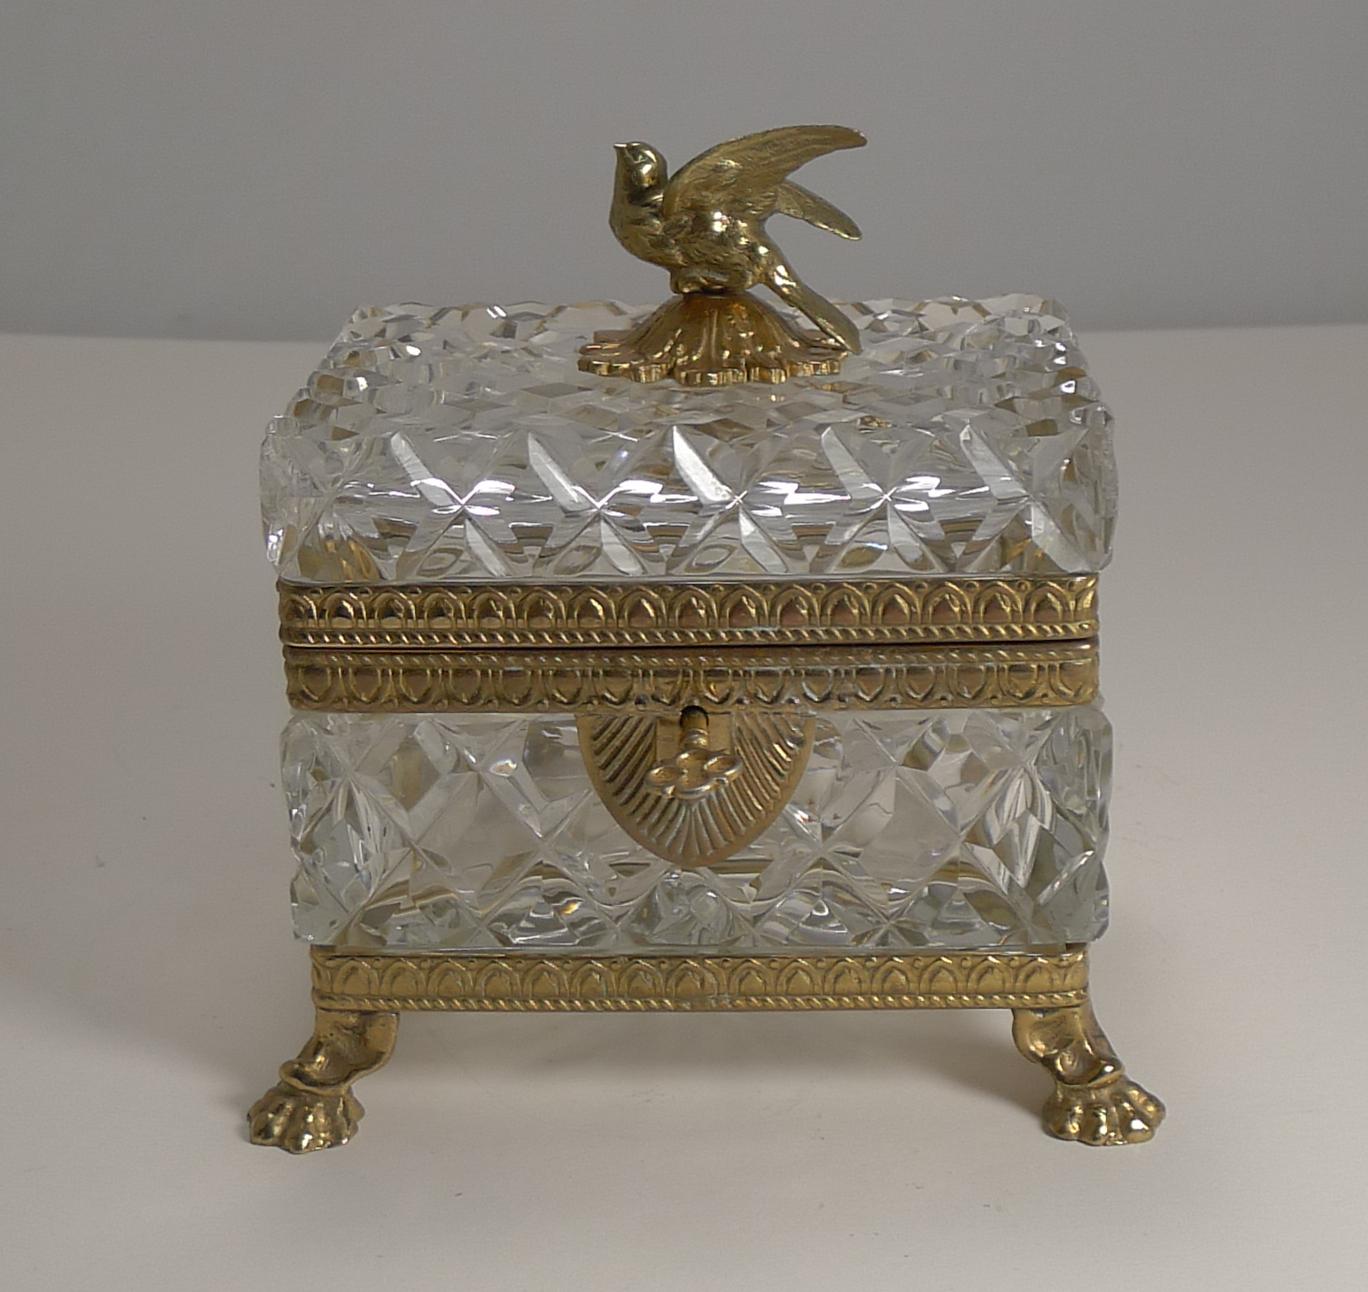 A very fine heavy crystal box deeply cut with ormolu mounts including Lion's paw feet and the most charming dove finial to the top.

The box is French dating to the early 20th century circa 1900 and comes complete with a working key.

As good as